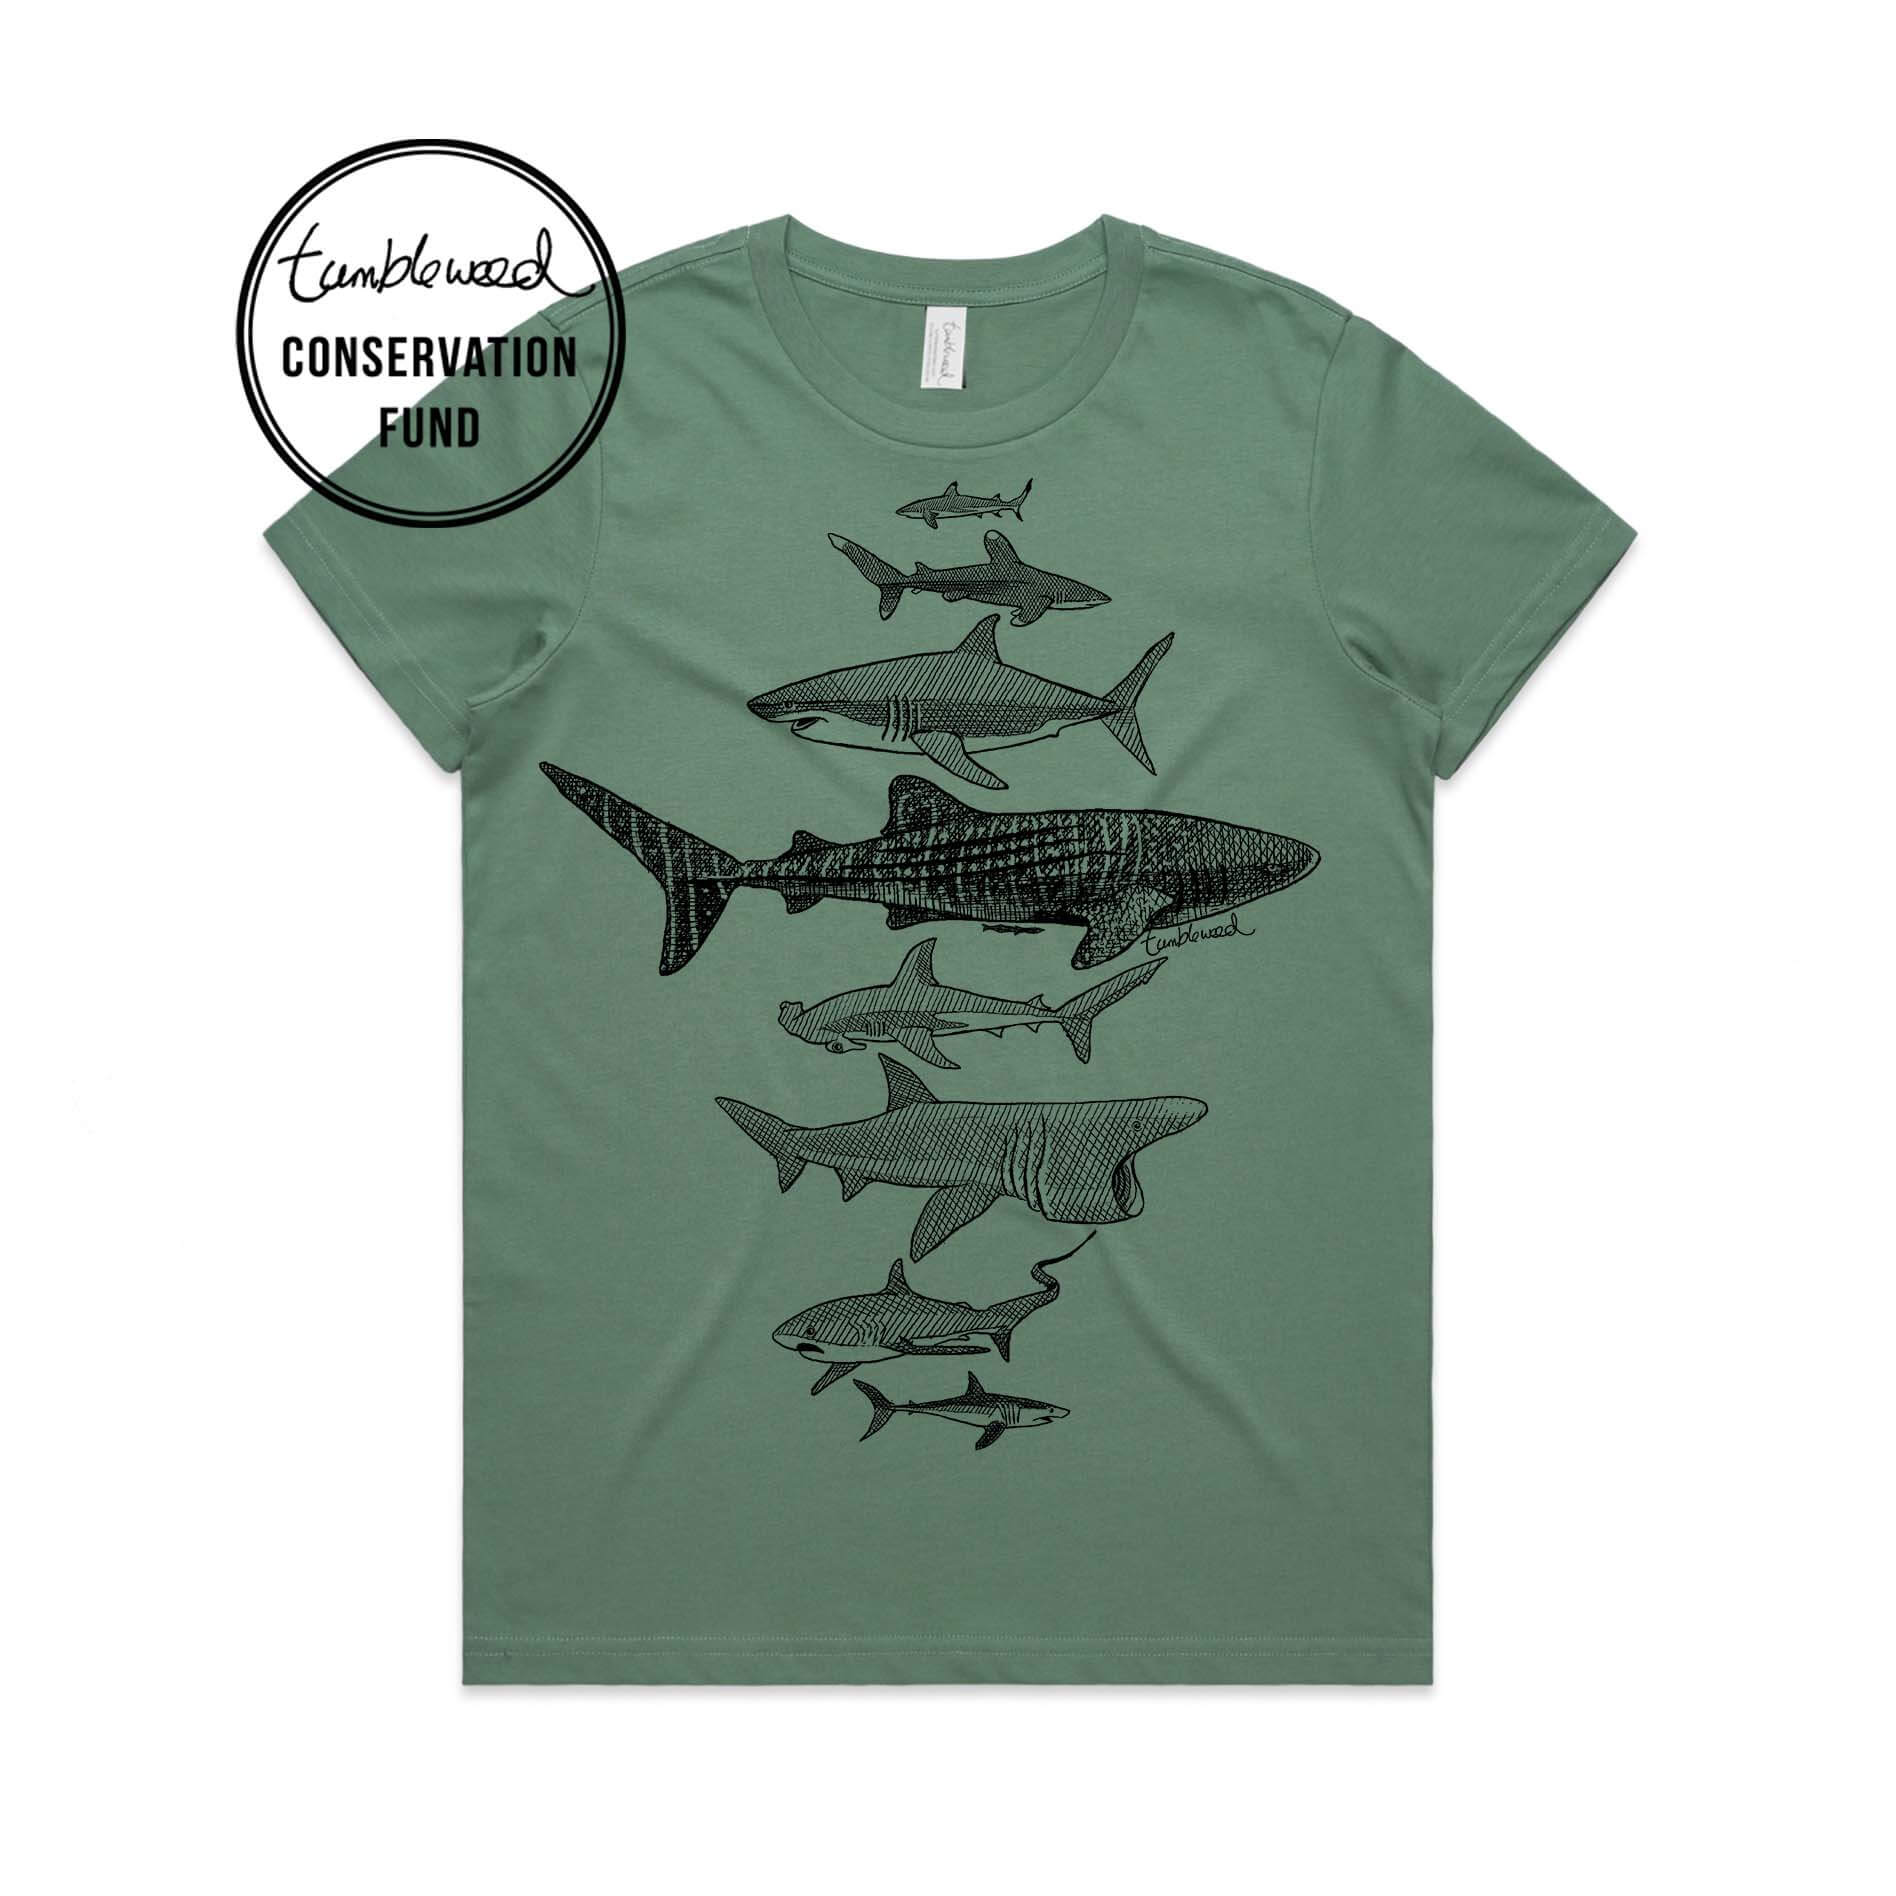 Sage, female t-shirt featuring a screen printed Sharks design.